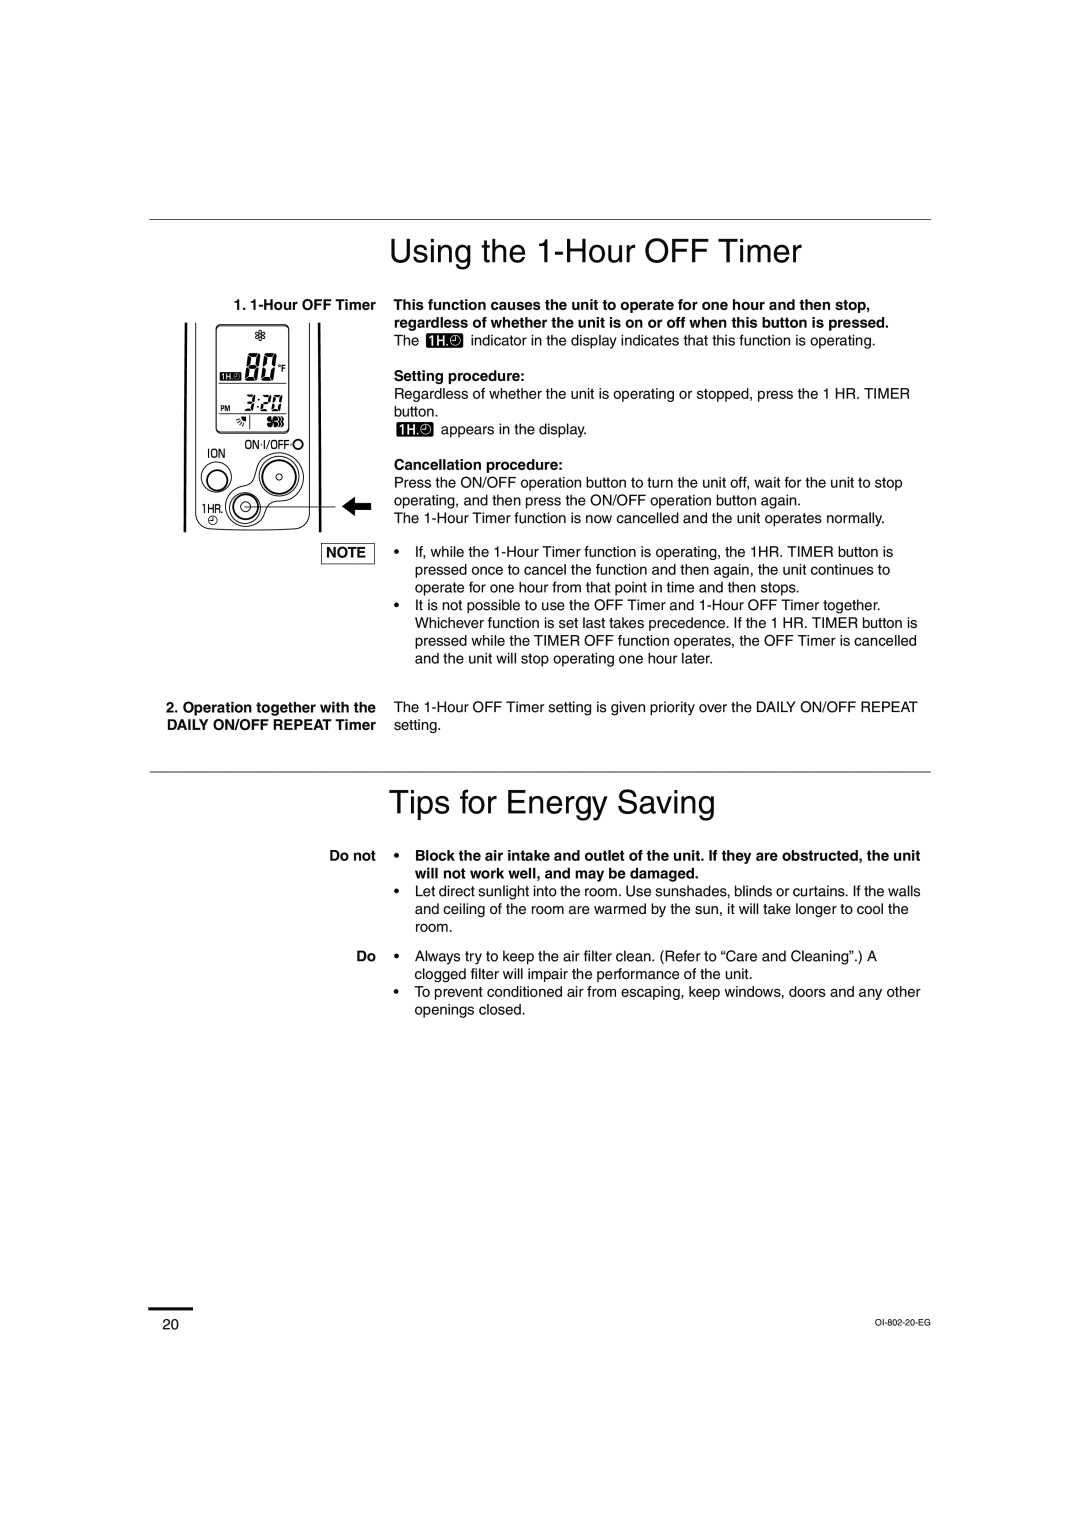 Sanyo KHS1271, KHS0971 Using the 1-Hour OFF Timer, Tips for Energy Saving, Setting procedure, Cancellation procedure 